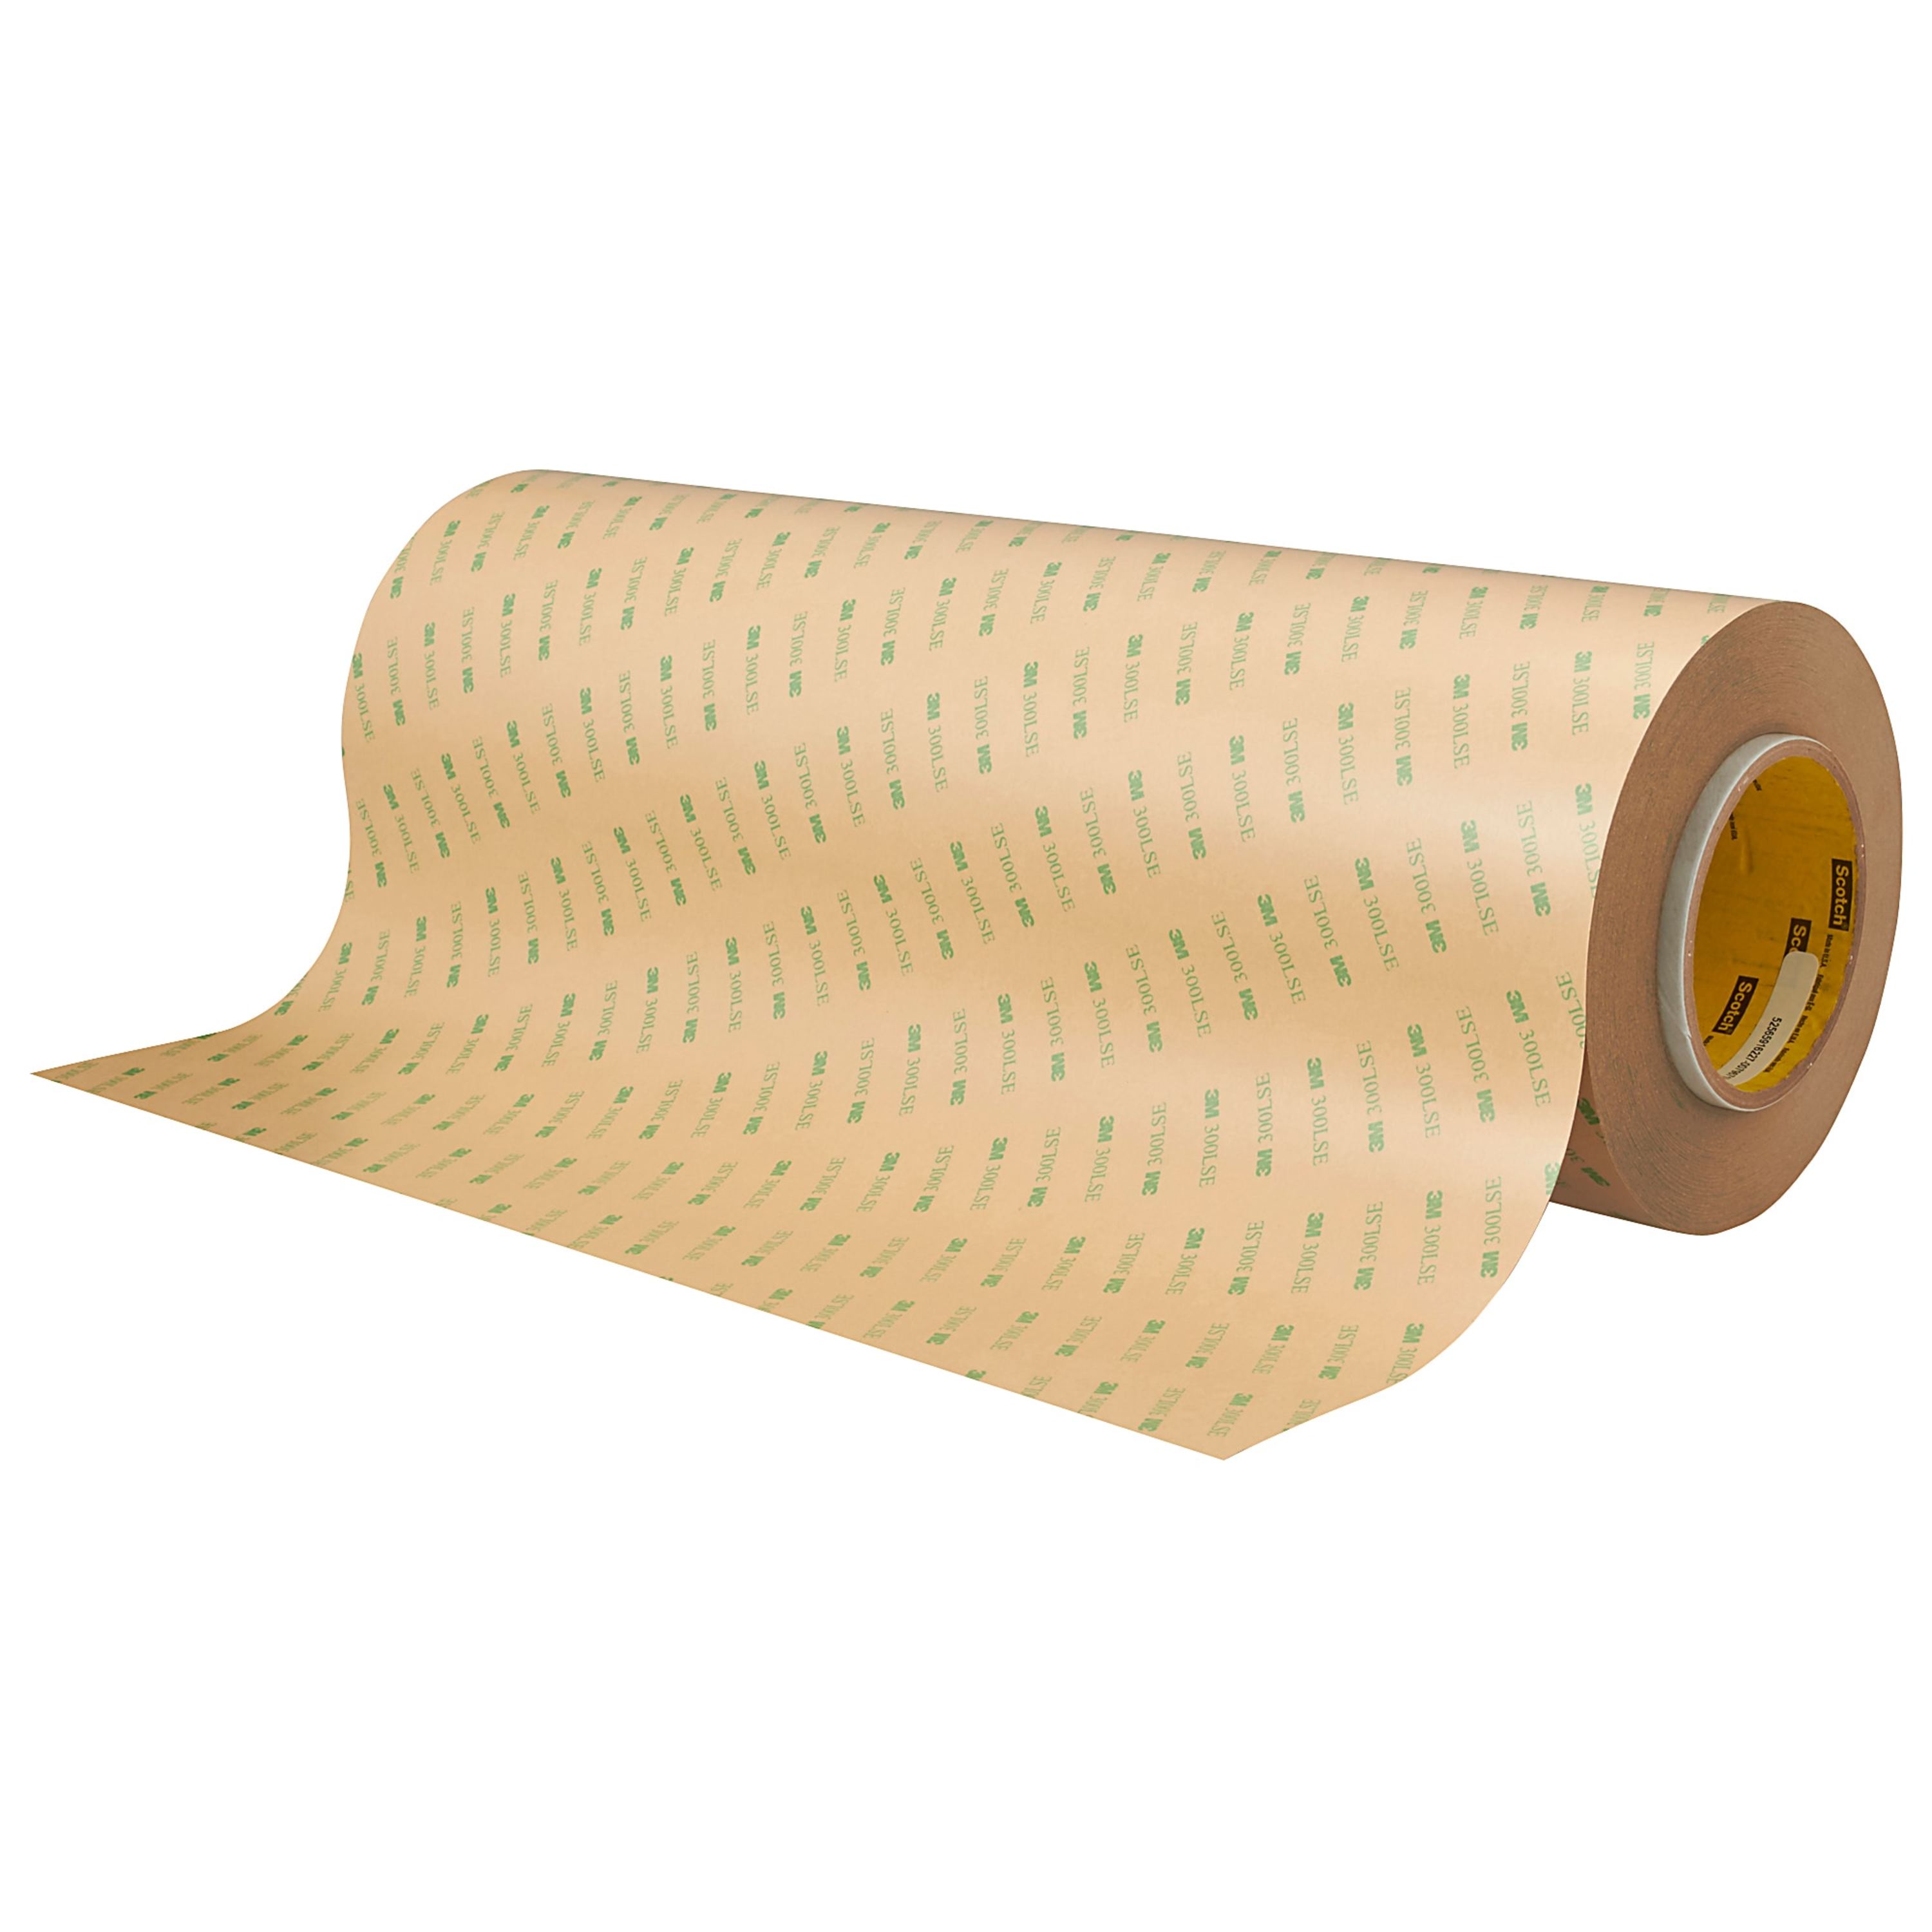 3M™ Adhesive Transfer Tape 9671LE, Clear, 12 in x 180 yd, 2 mil, 1 roll
per case